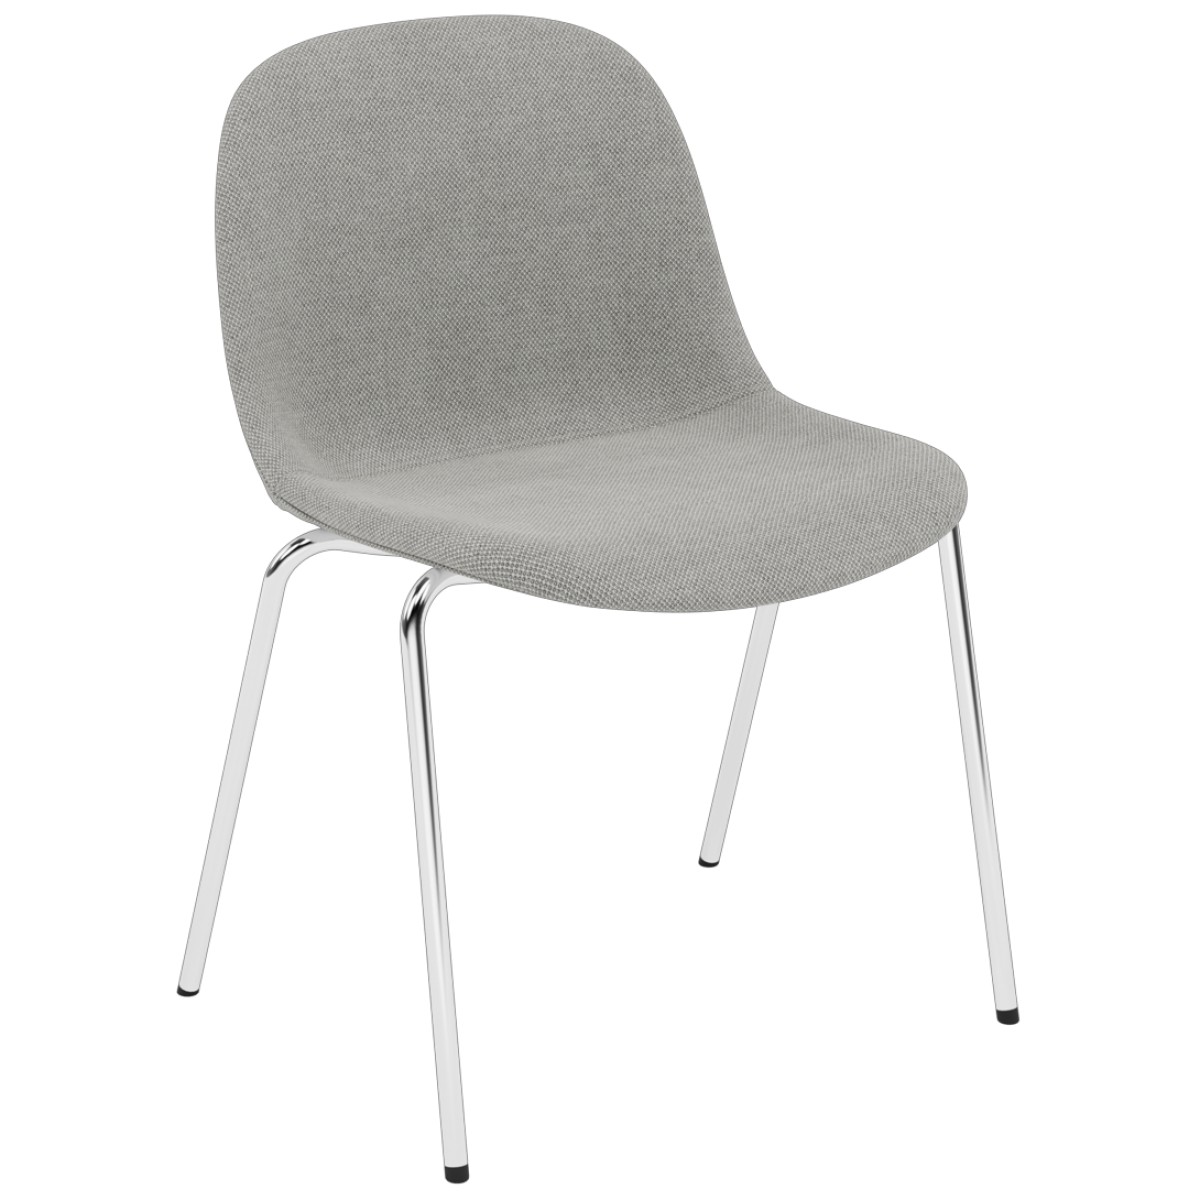 Fiber Side Chair / A-Base with Felt Glides (Full Upholstery)